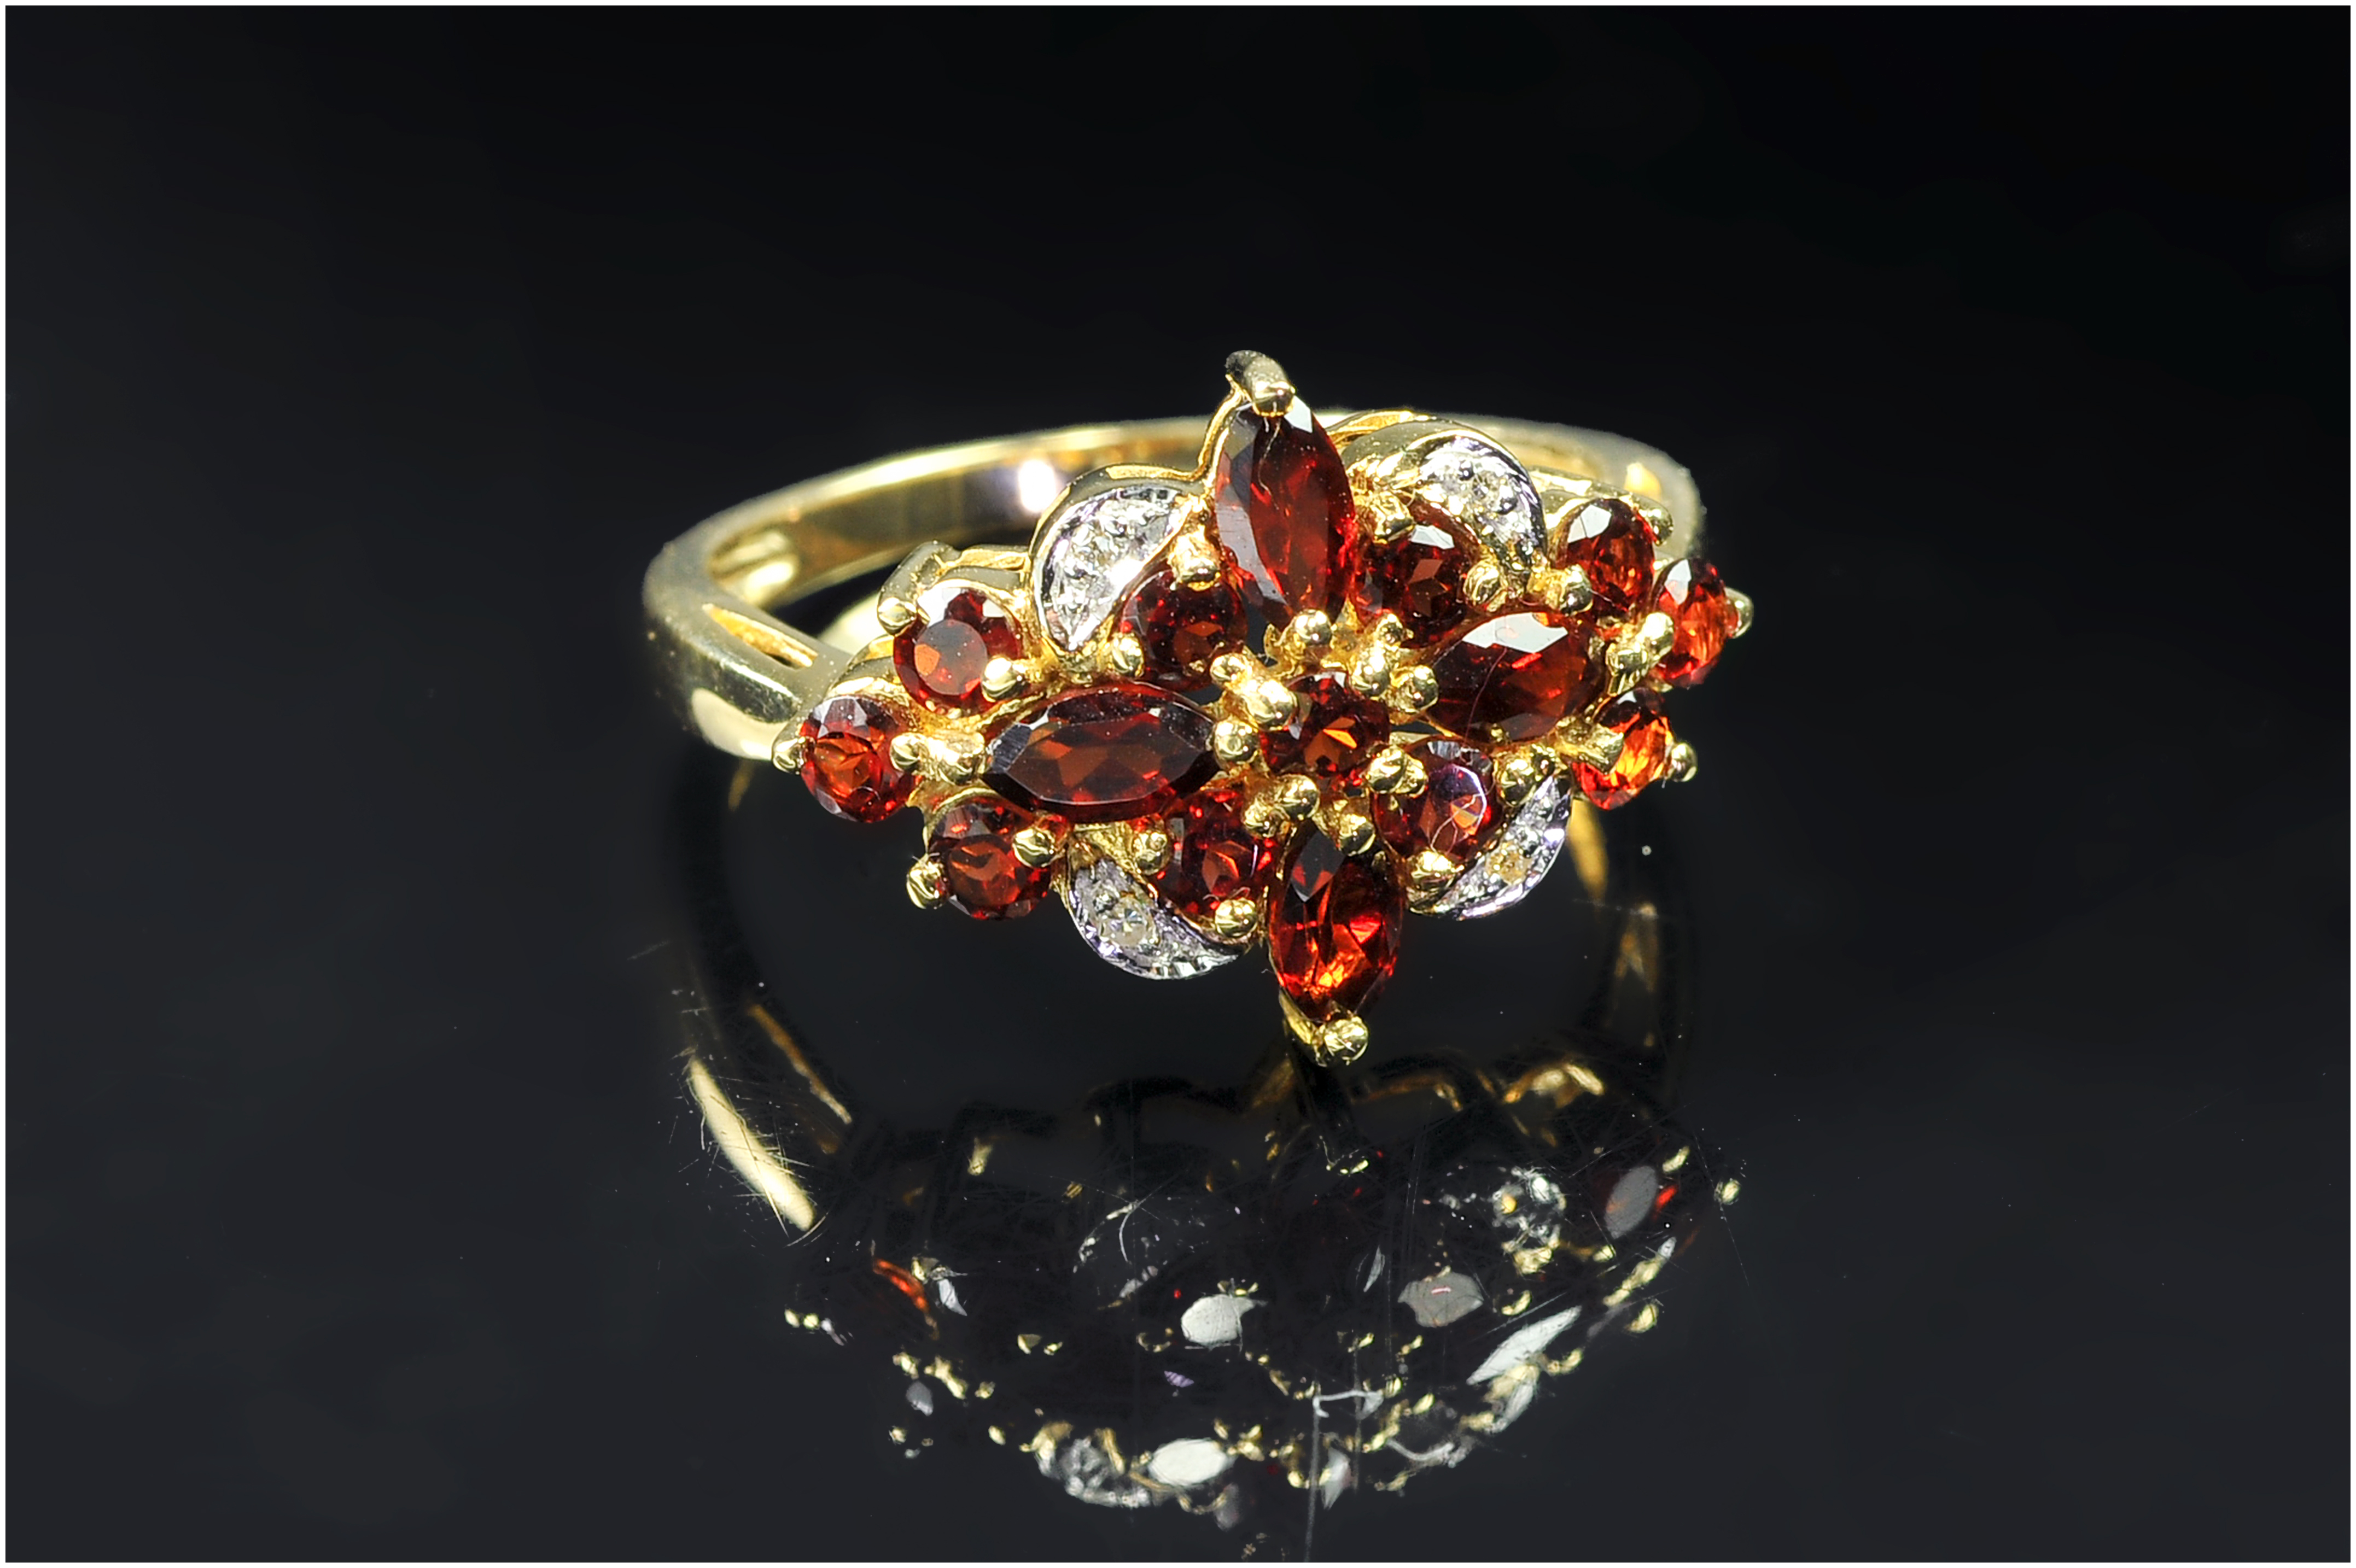 9ct Gold Diamond Dress Ring, Set With A Central Cluster Of Garnets Between Diamond Spacers, Fully - Image 2 of 5